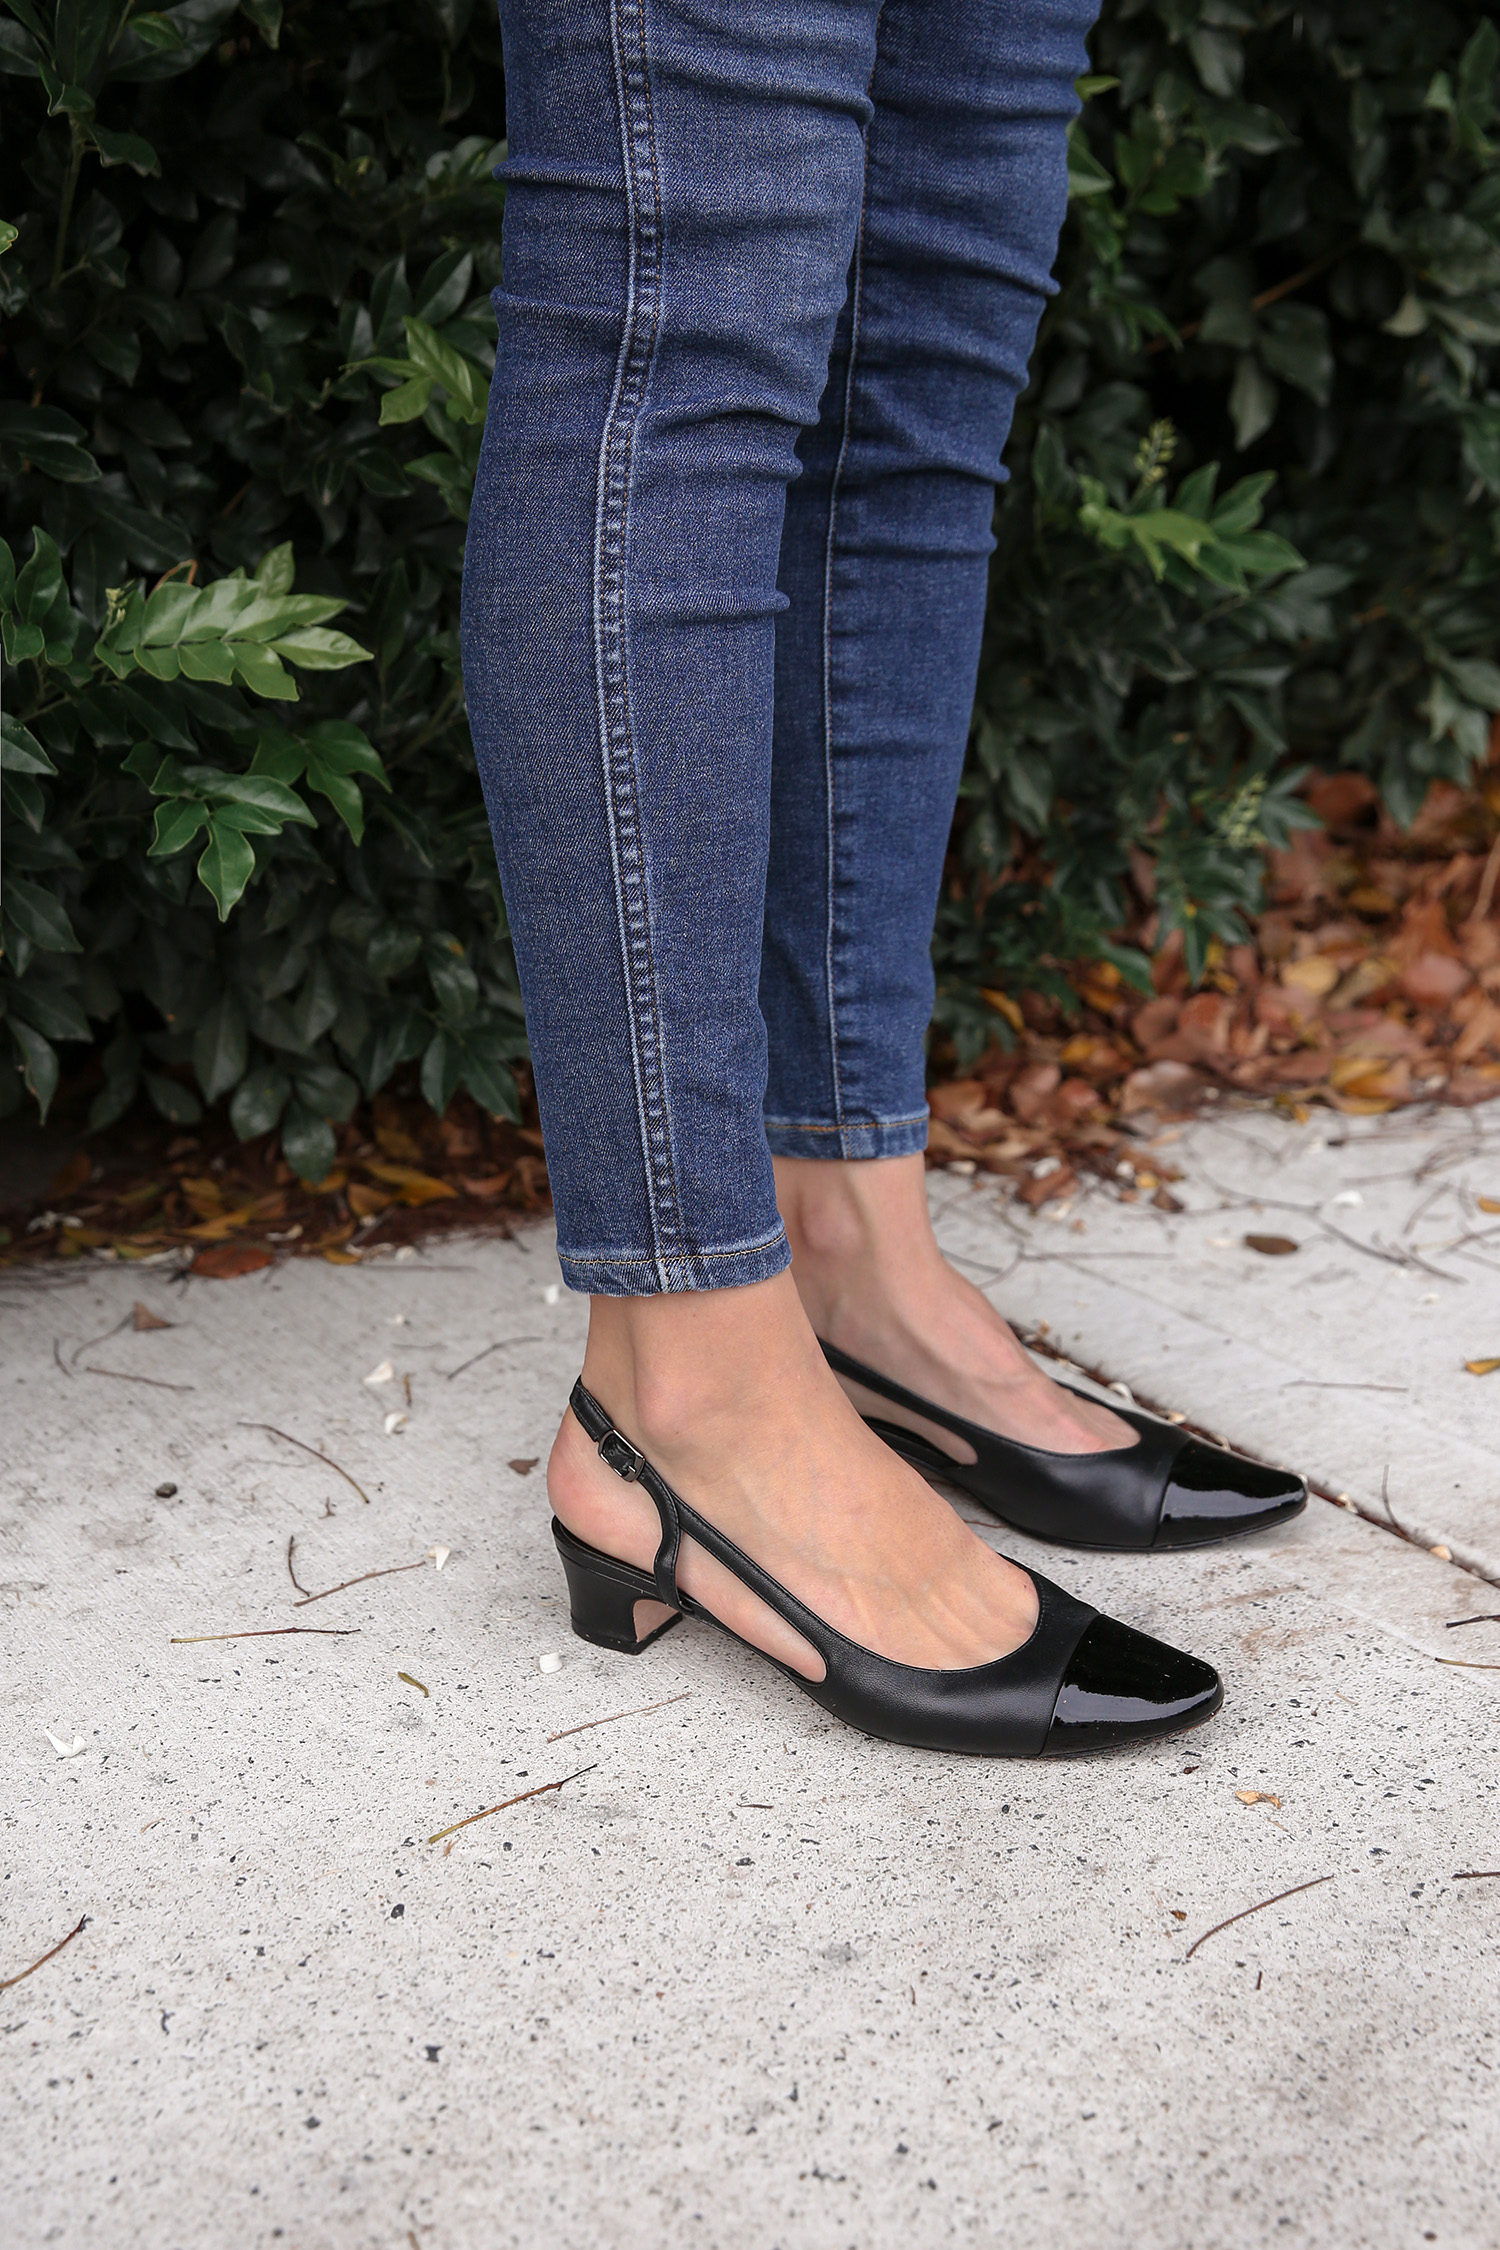 Everlane Way High Jean Review - Mademoiselle | Minimal Style Blog